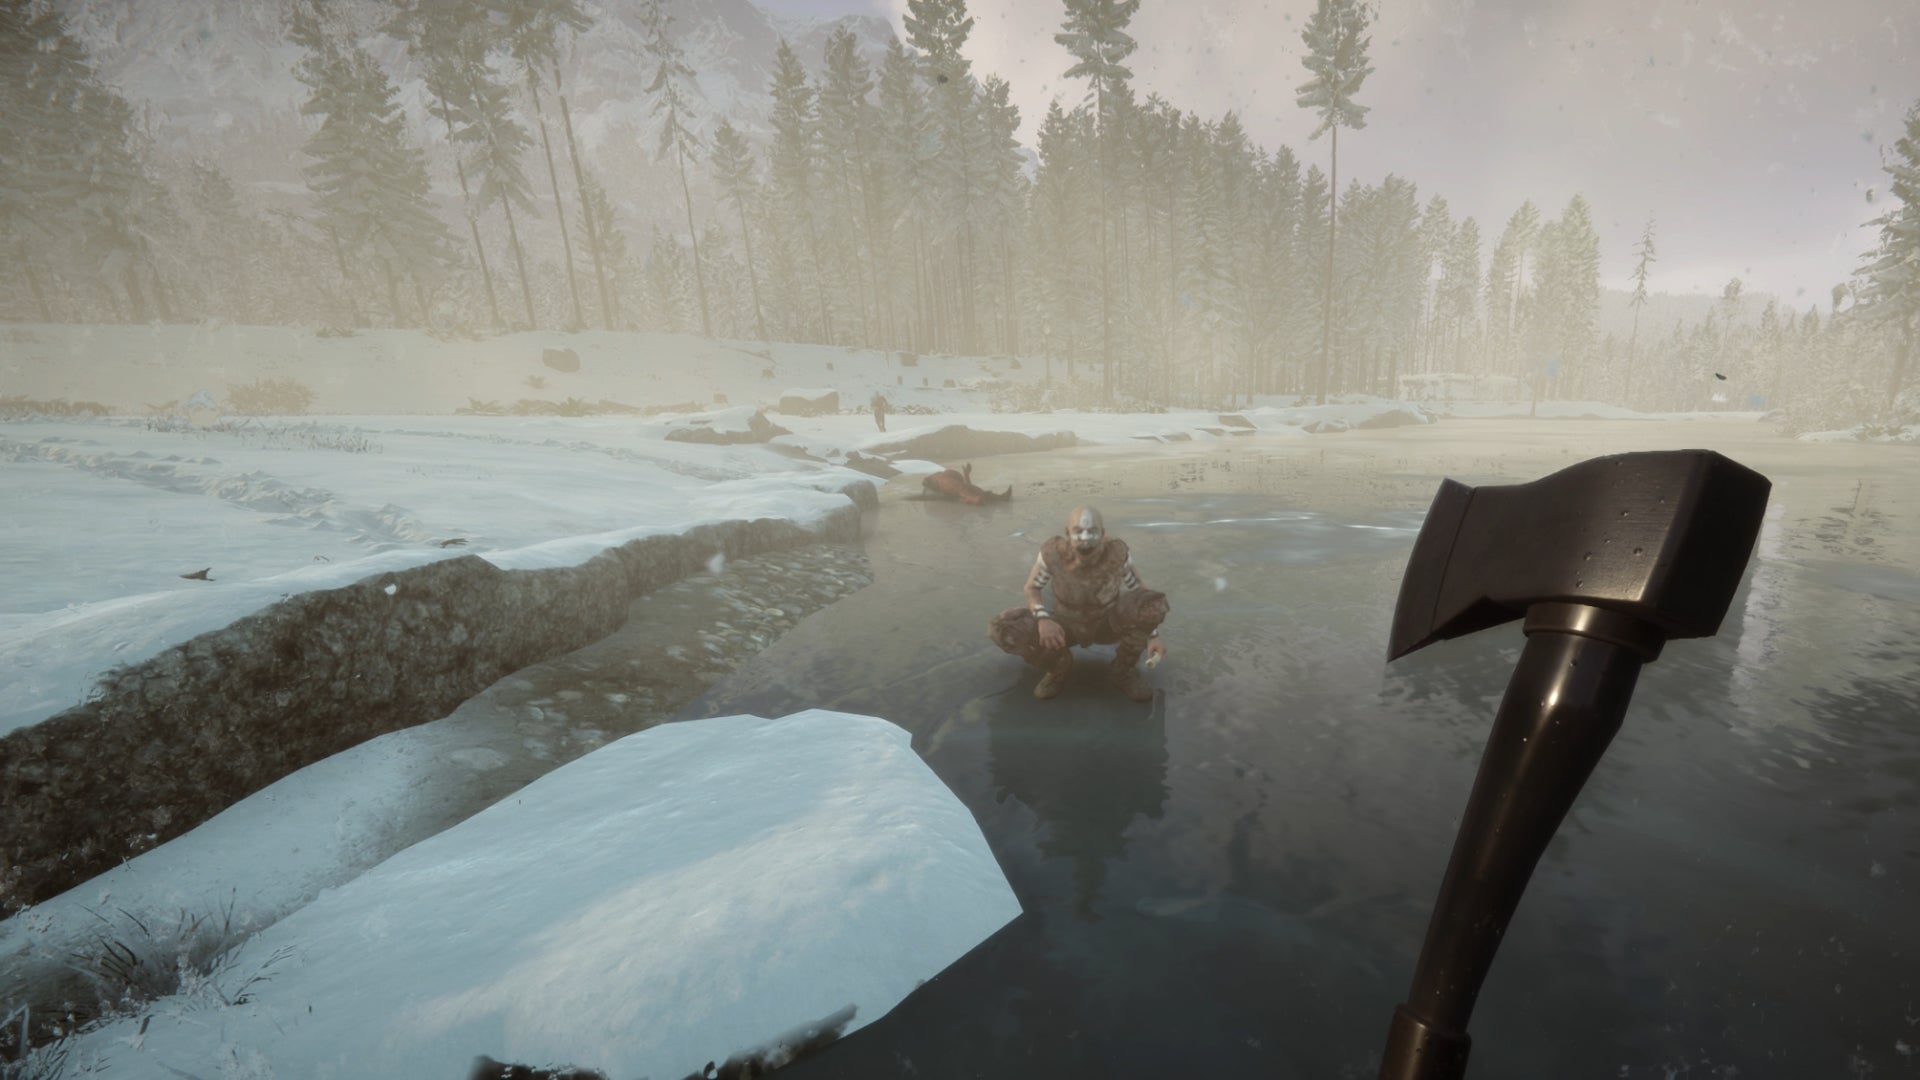 A mutant cannibal enemy in Sons Of The Forest crouches down on an iced over lake, watching the player approach with an axe.